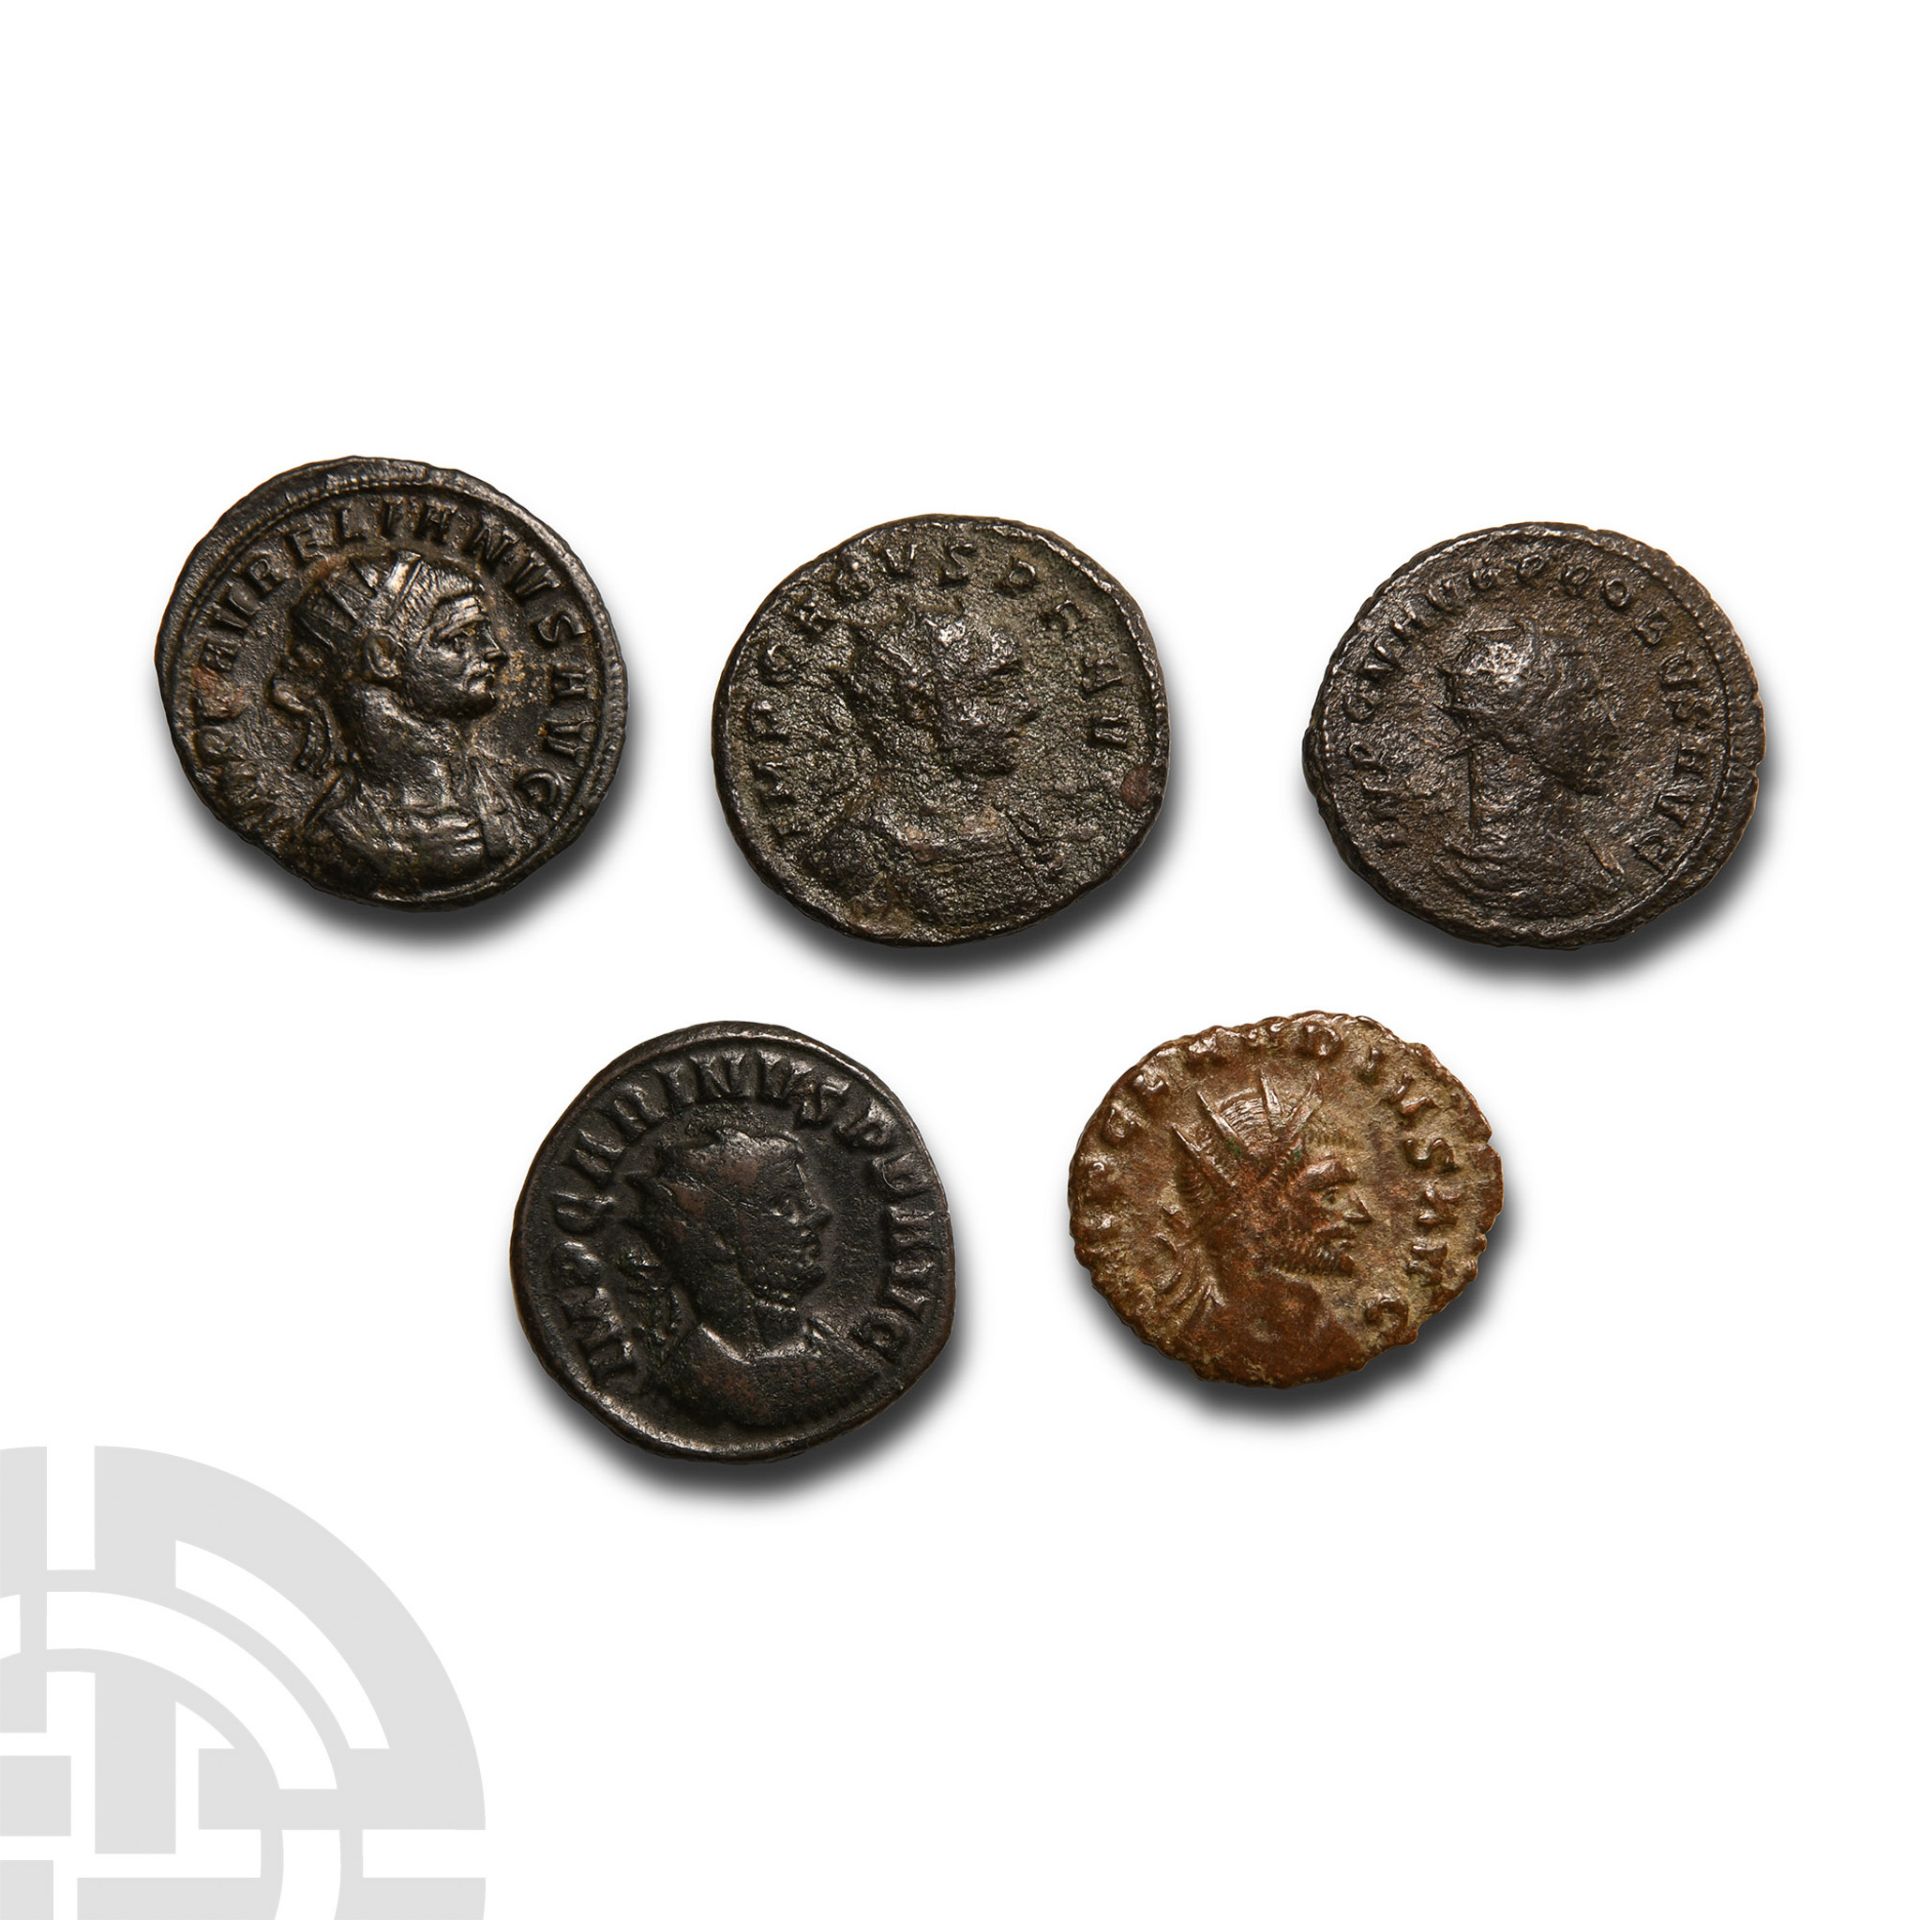 Ancient Roman Imperial Coins - Mixed AE Antoninianus Group [5]